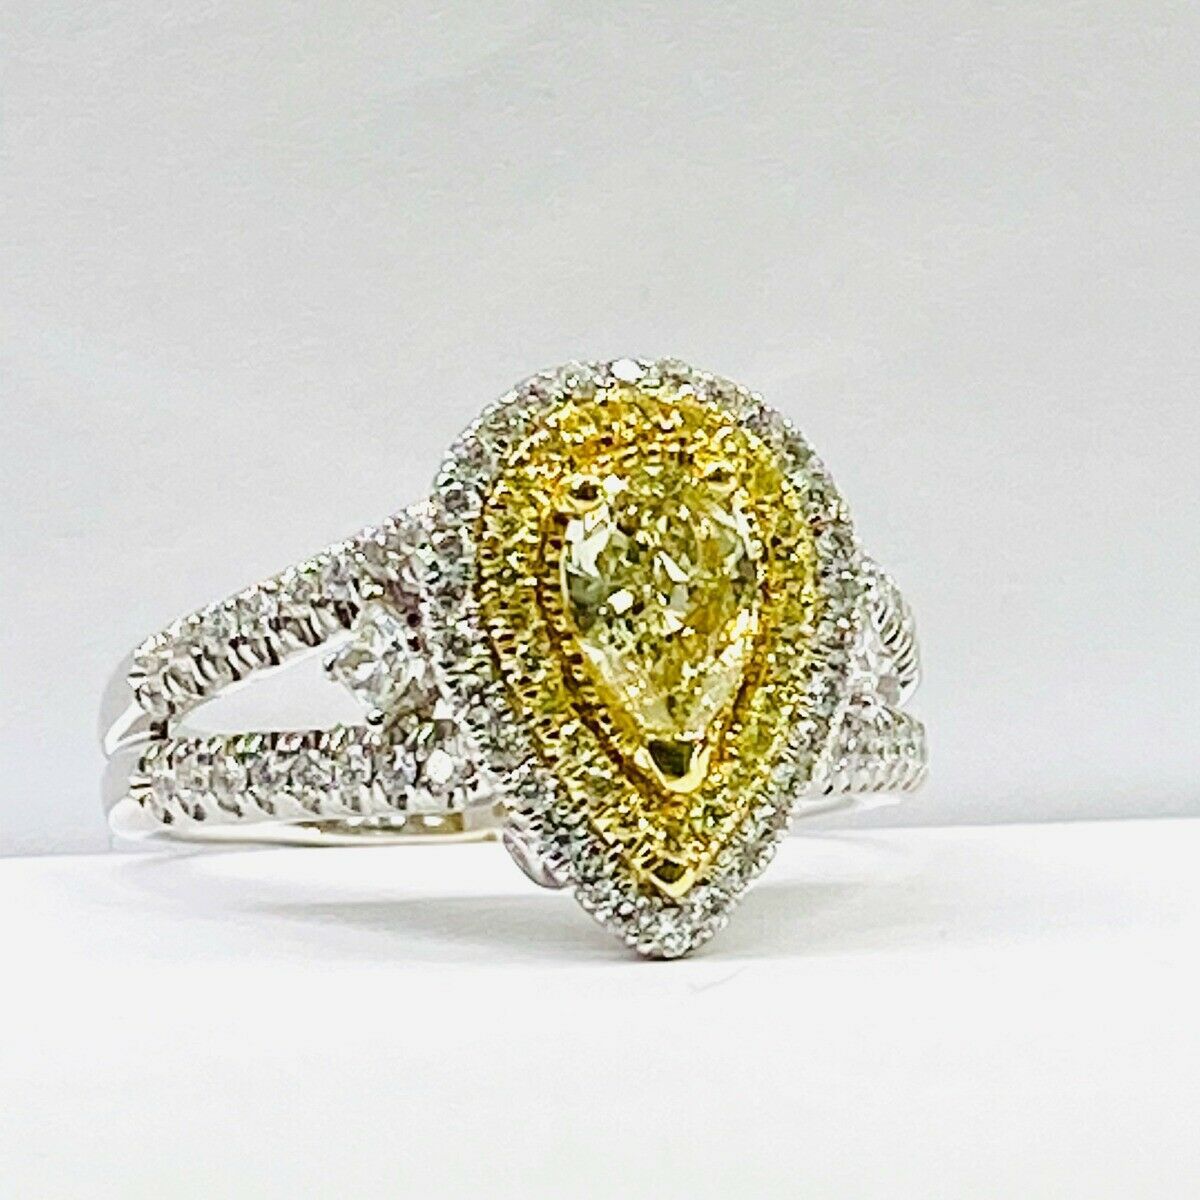 Primary image for 1.31 Ct Pear Cut Yellow Diamond Engagement Ring 14k White Gold Split Shank